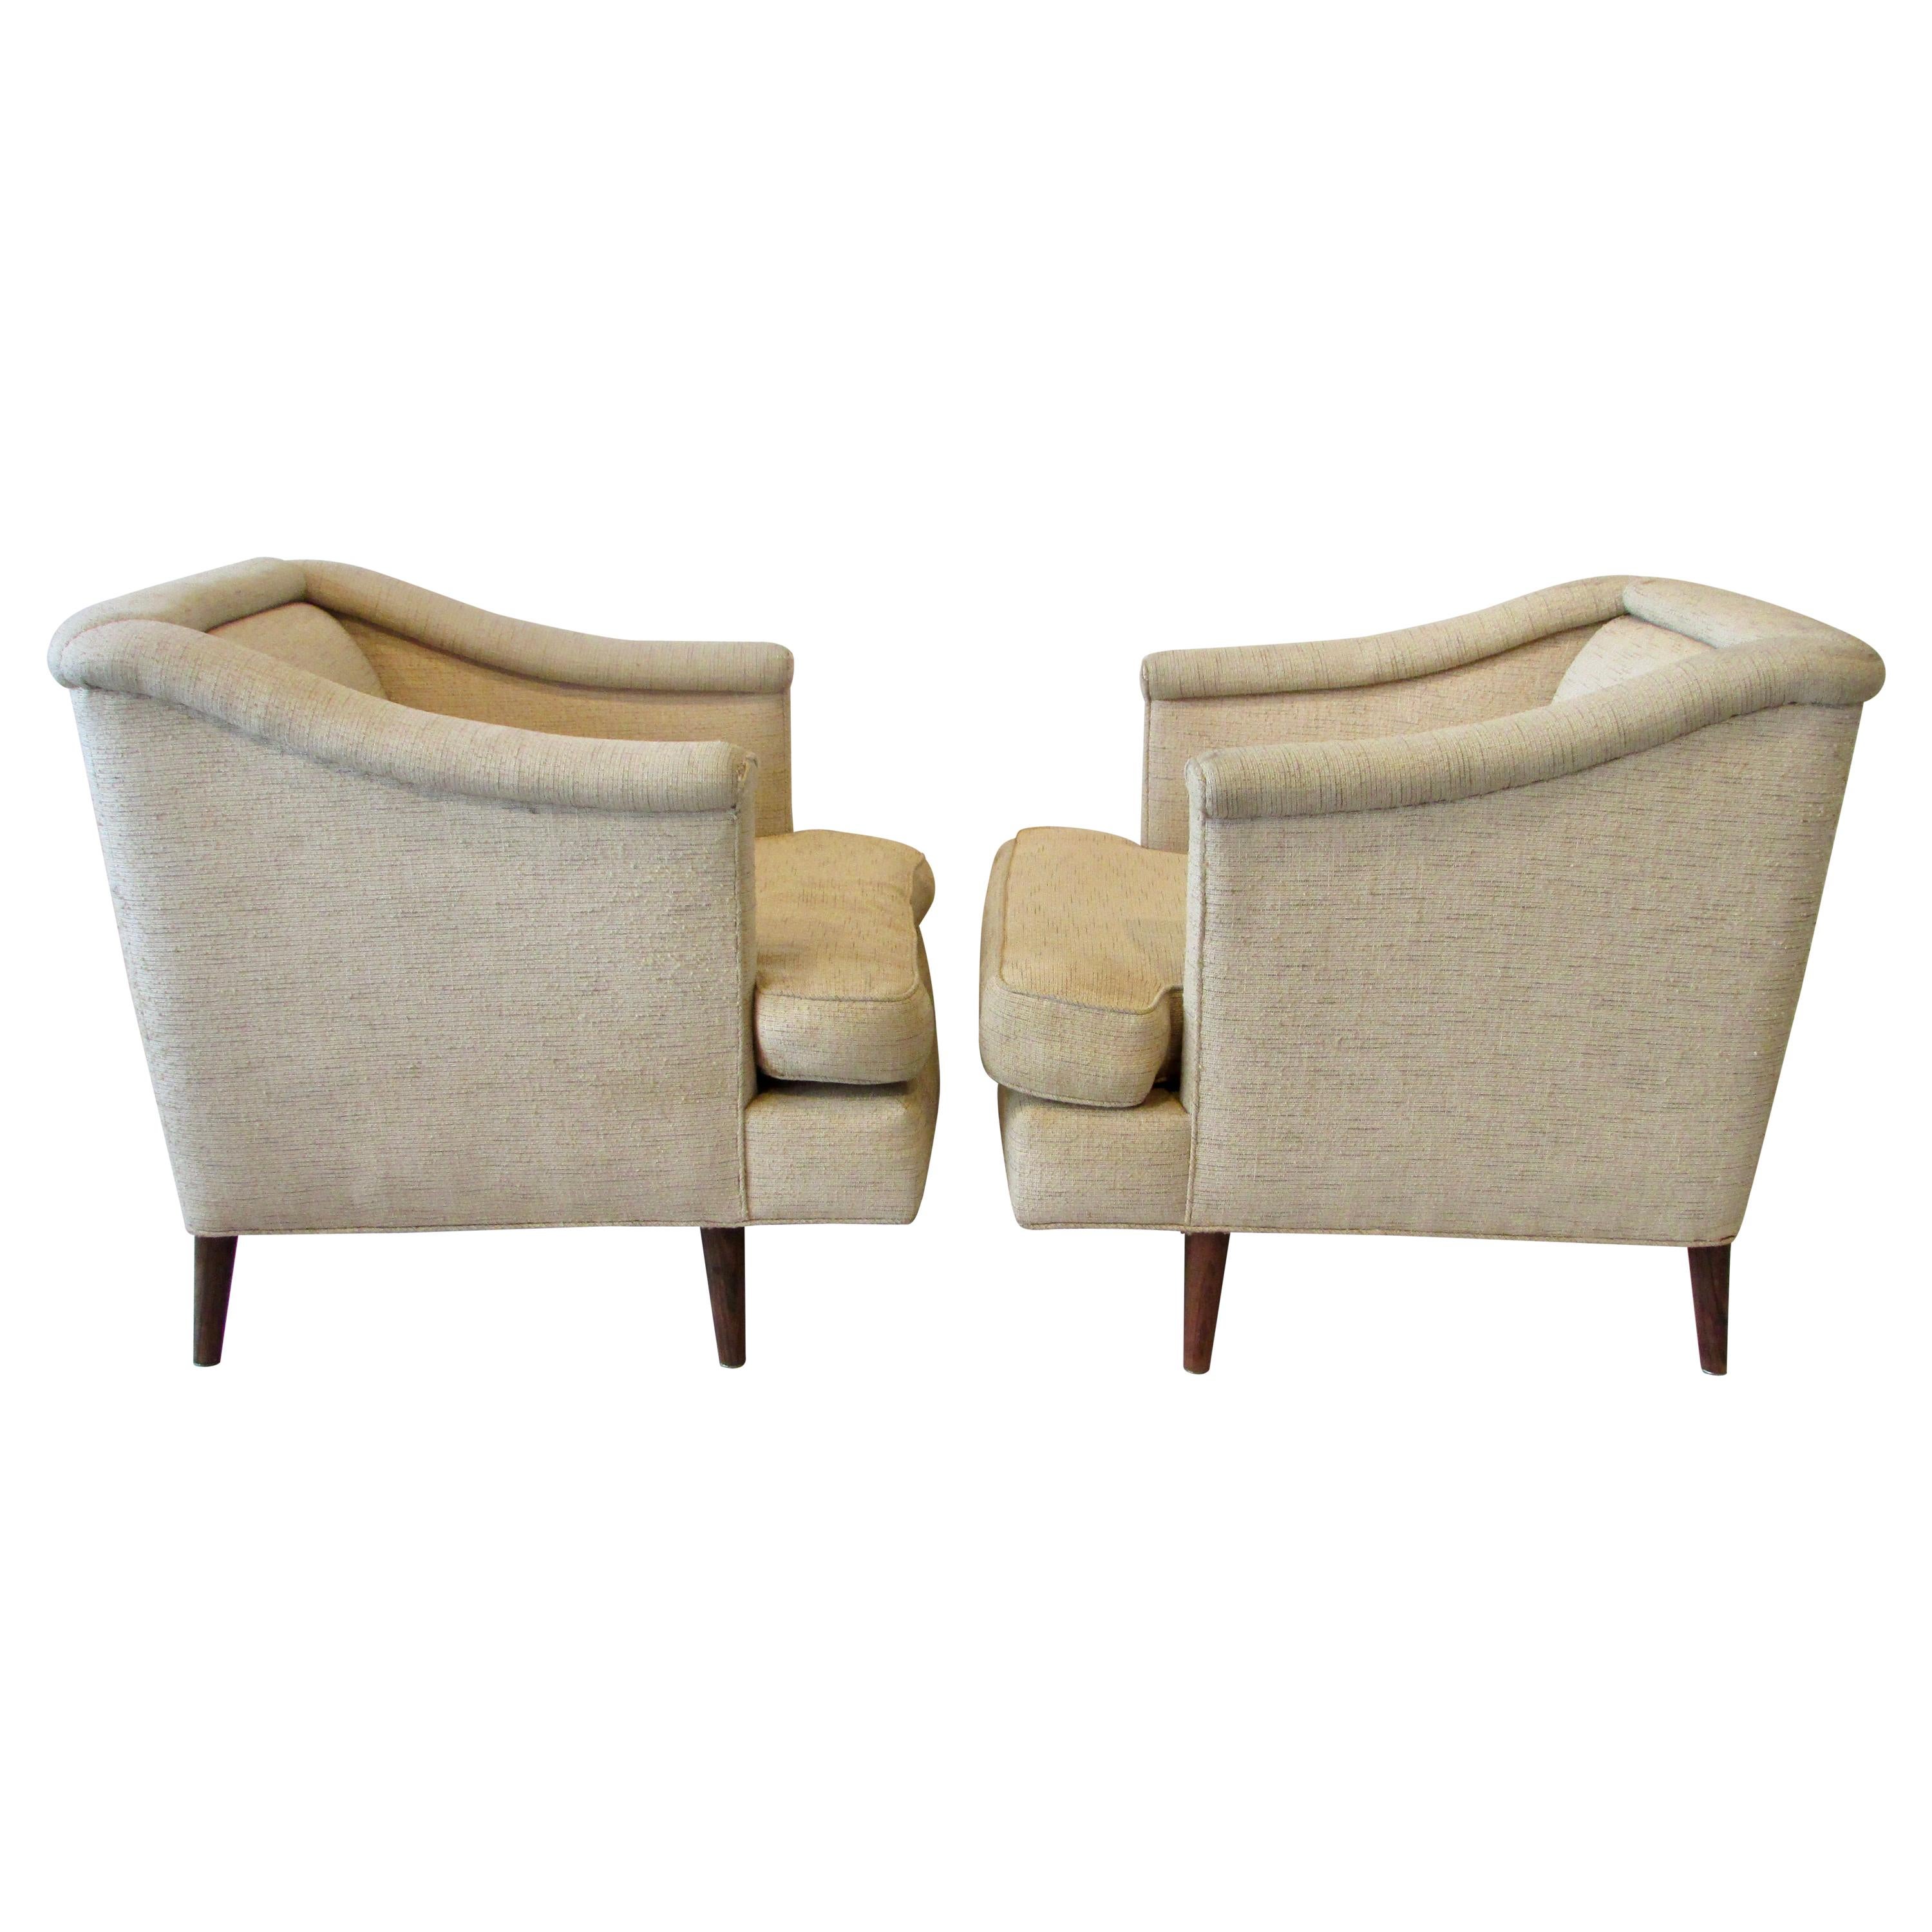 Pair of Edward Wormley Dunbar for Moderns Lounge Chairs as Found Originals